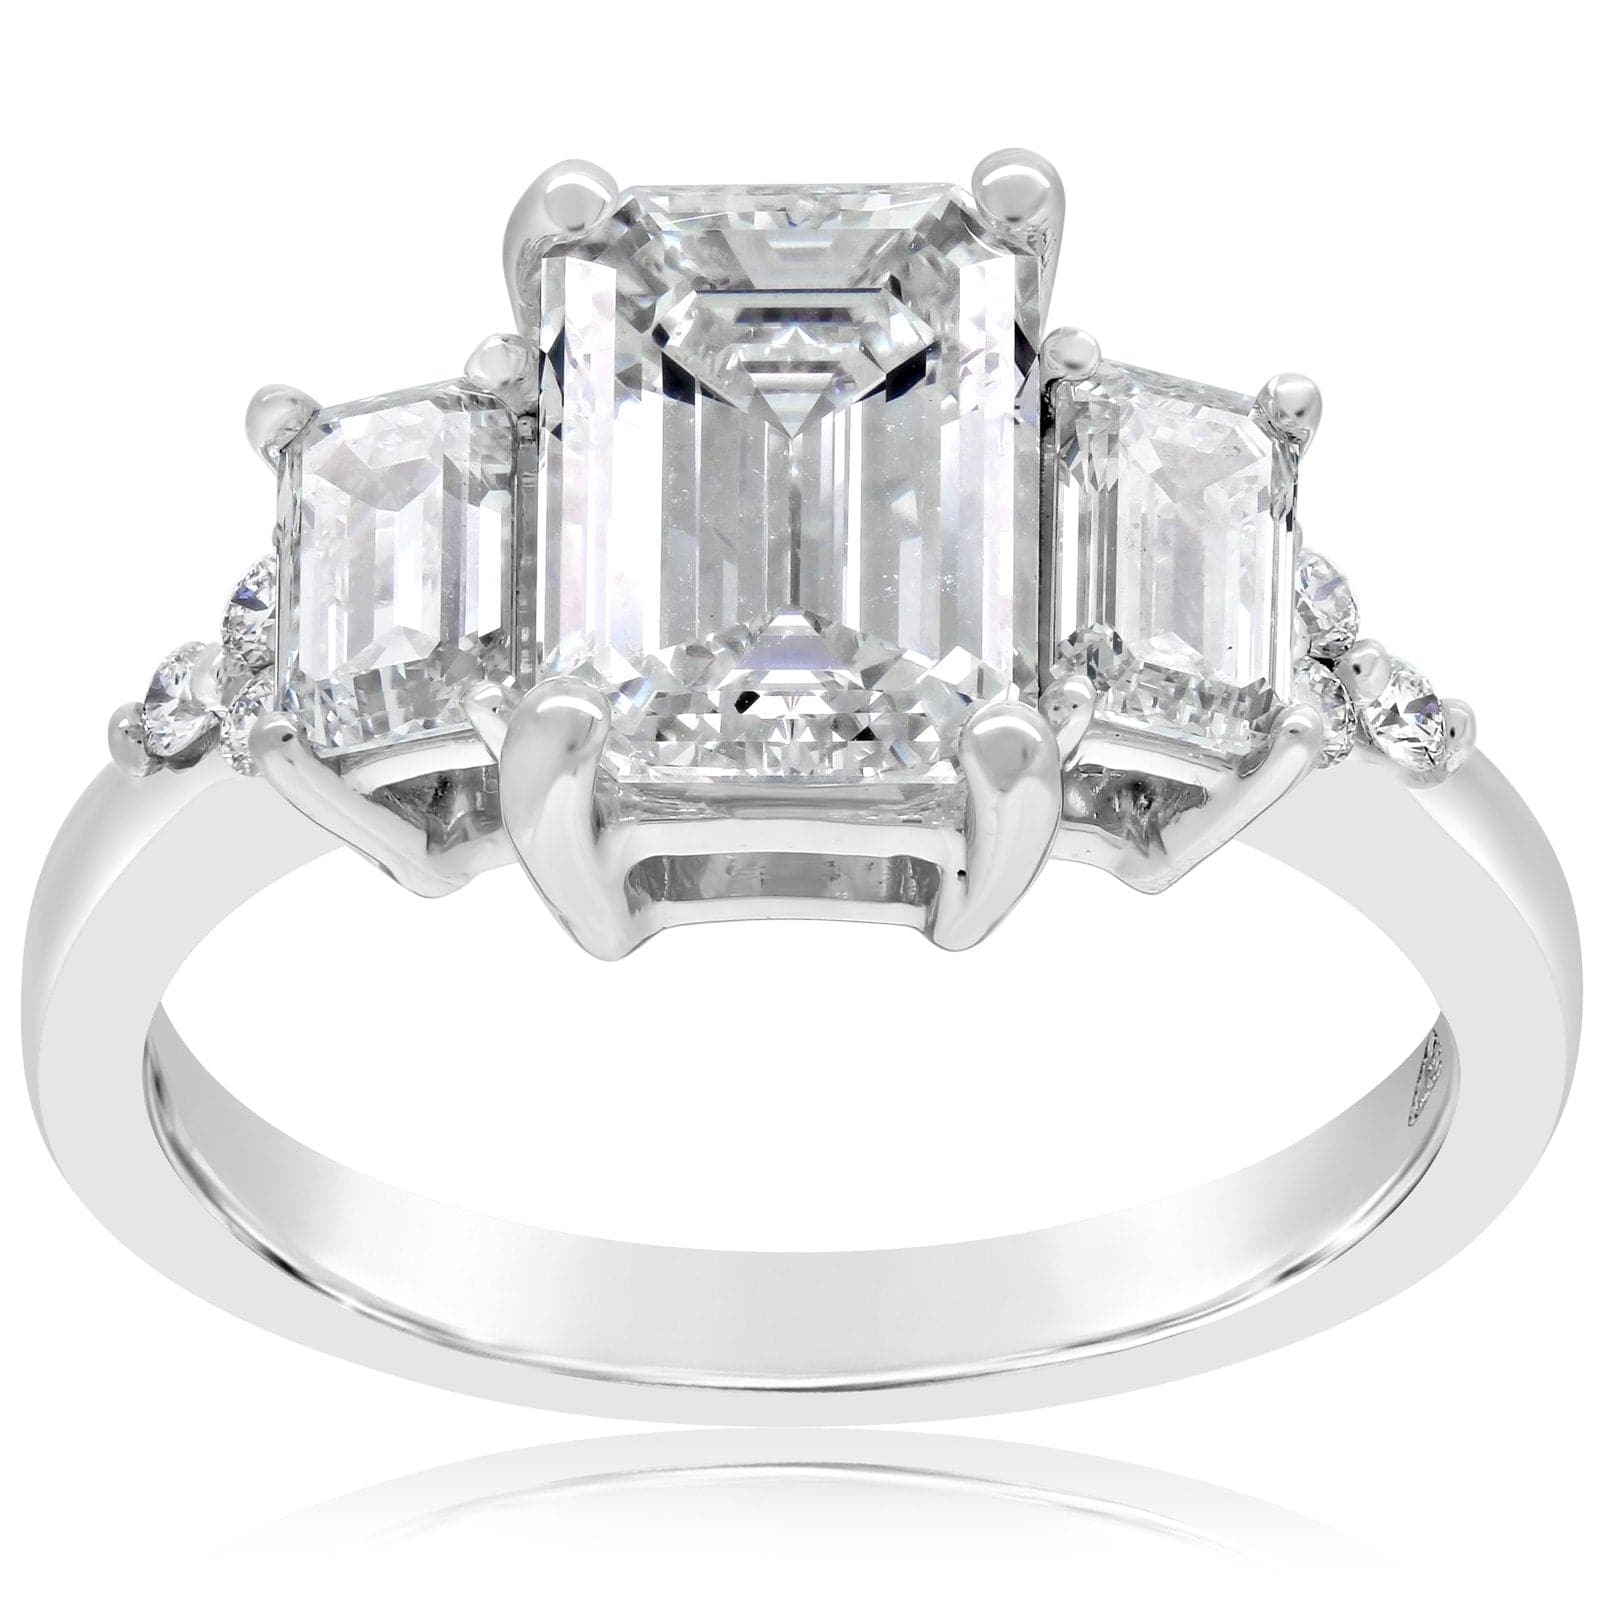 WIDE BAND WHITE GOLD ENGAGEMENT RING SETTING WITH INVISIBLE SET PRINCE -  Howard's Jewelry Center